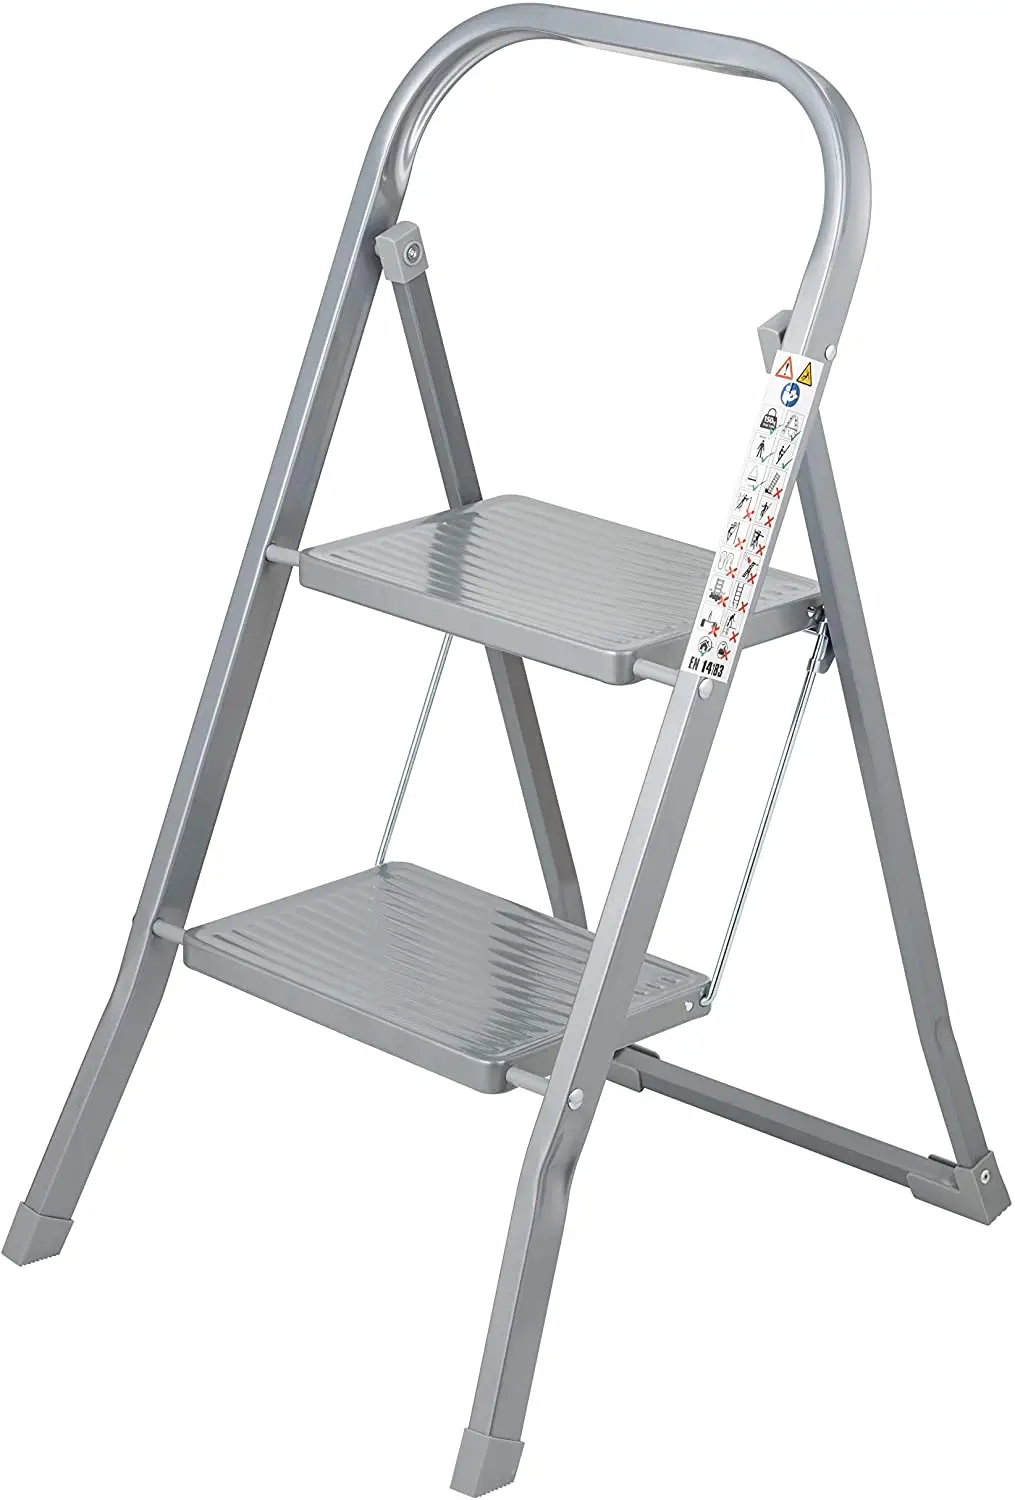 2 Step Steel Ladder - Anti Slip Feet - Easy to Store Foldable Design - Ideal for Home/Kitchen